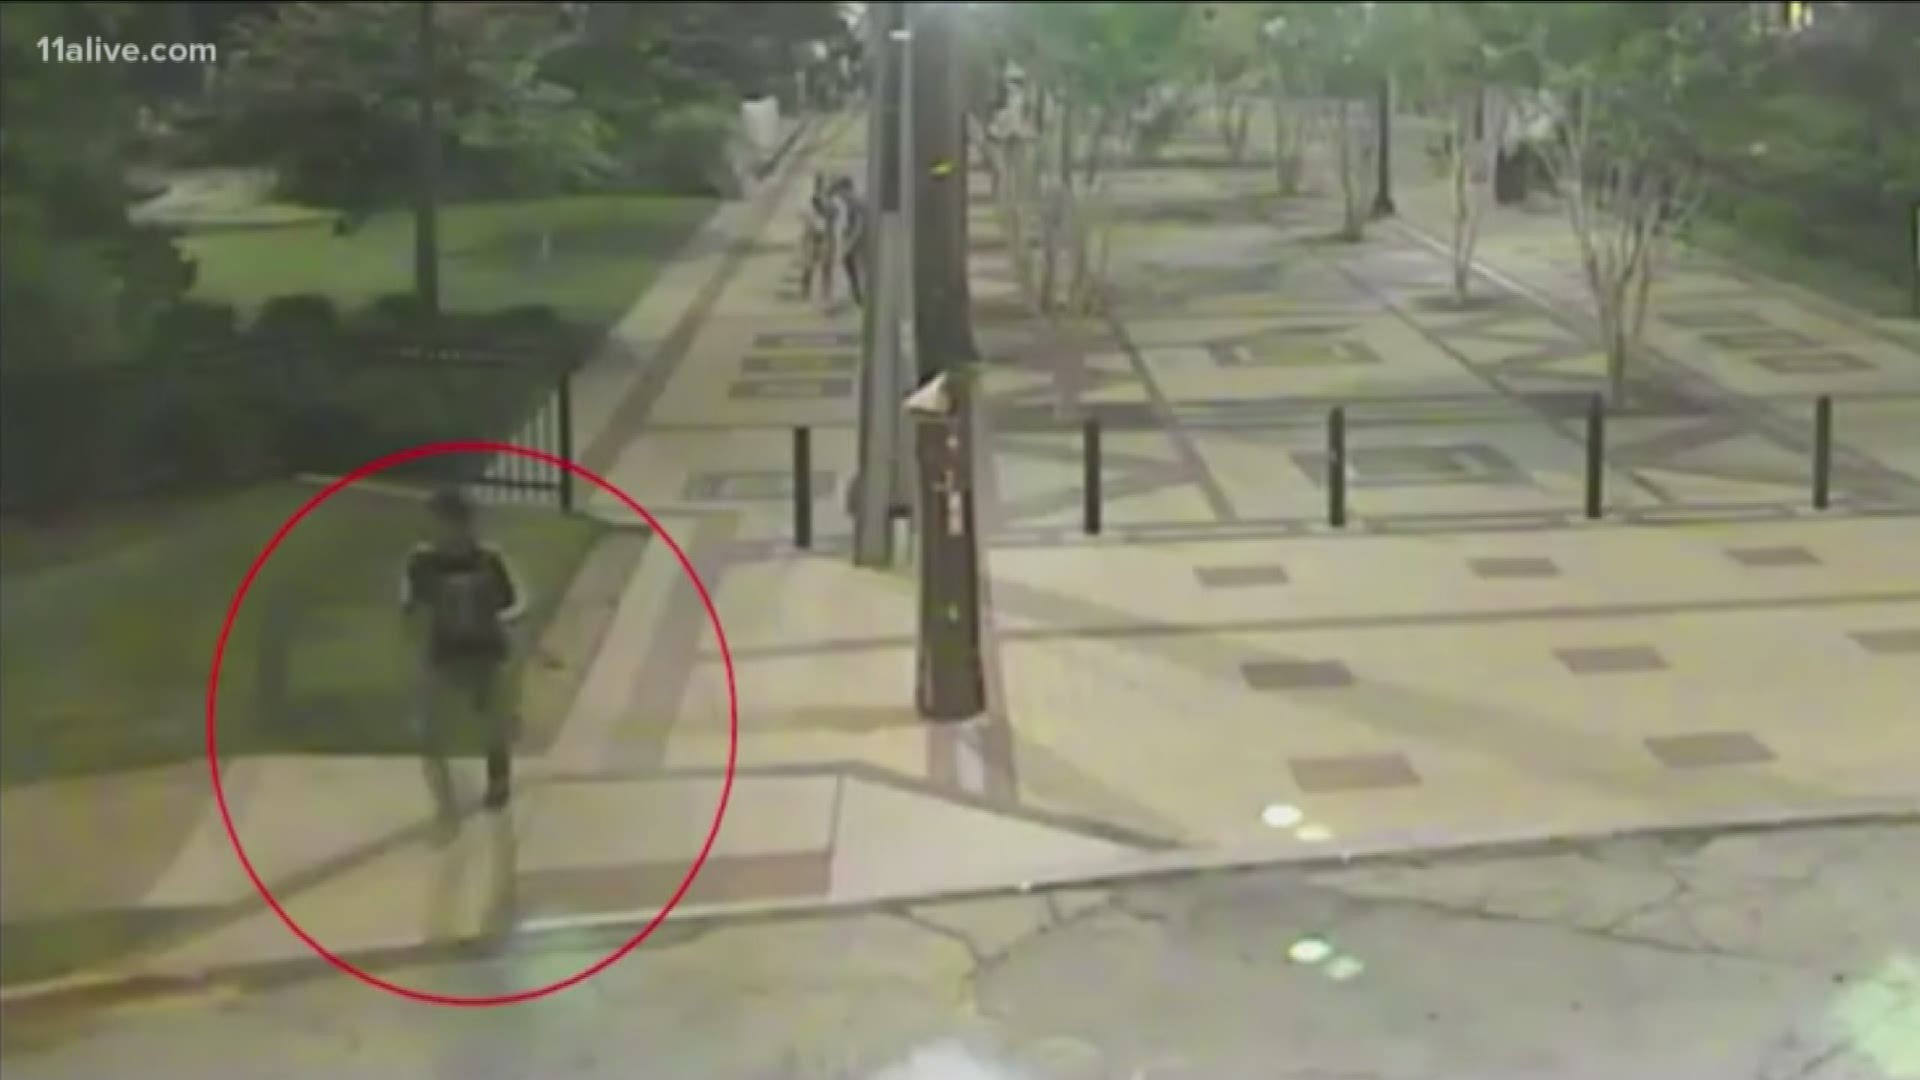 Atlanta Police investigators continue to seek assistance from the public in identifying the second accused shooter involved in the exchange of gunfire near the Atlanta University Center library last month that left four students hurt.